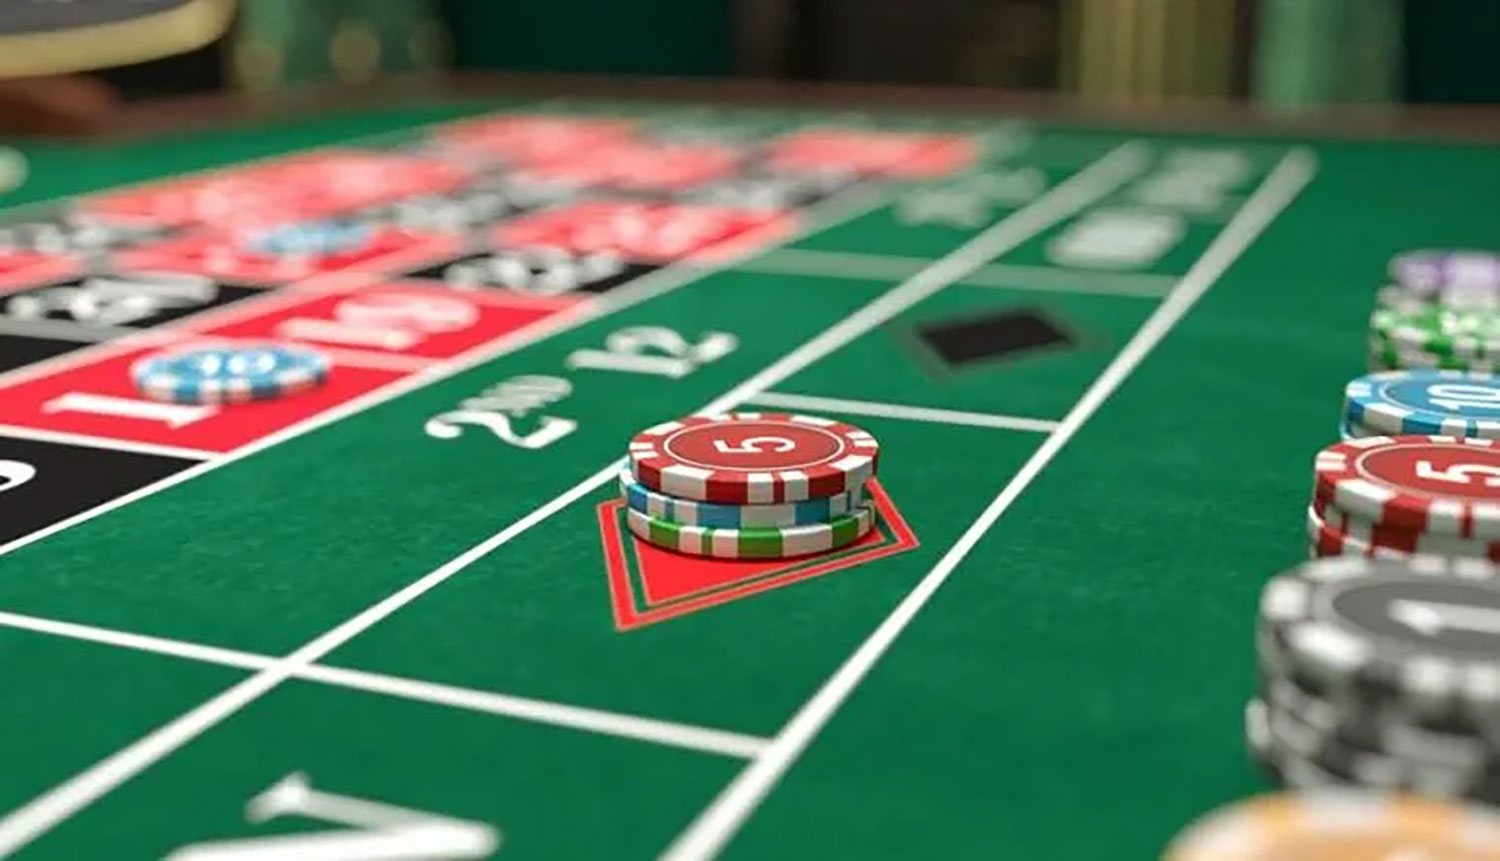 How to Play Roulette - Tips for Playing Roulette Online